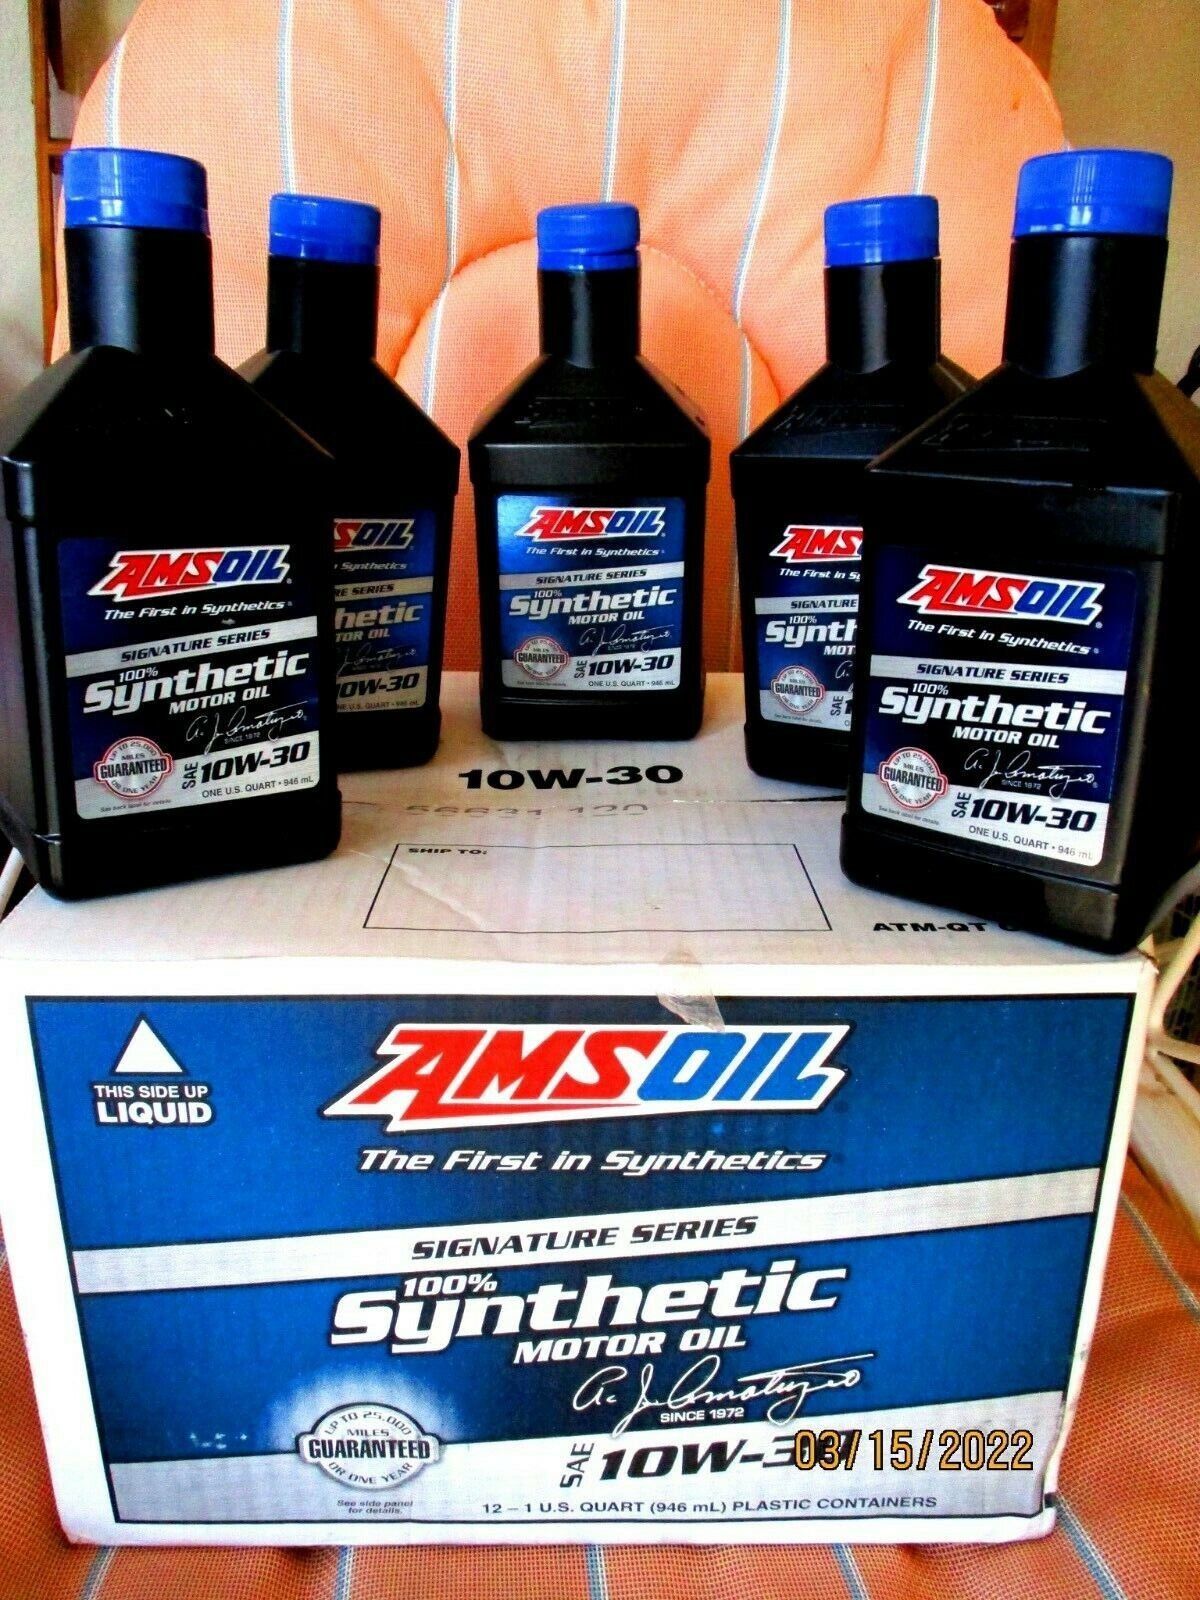 4.5 Quarts 100% Synthetic Motor Oil 10W-30  AMS Oil  Signature Series  25K 1 Yr